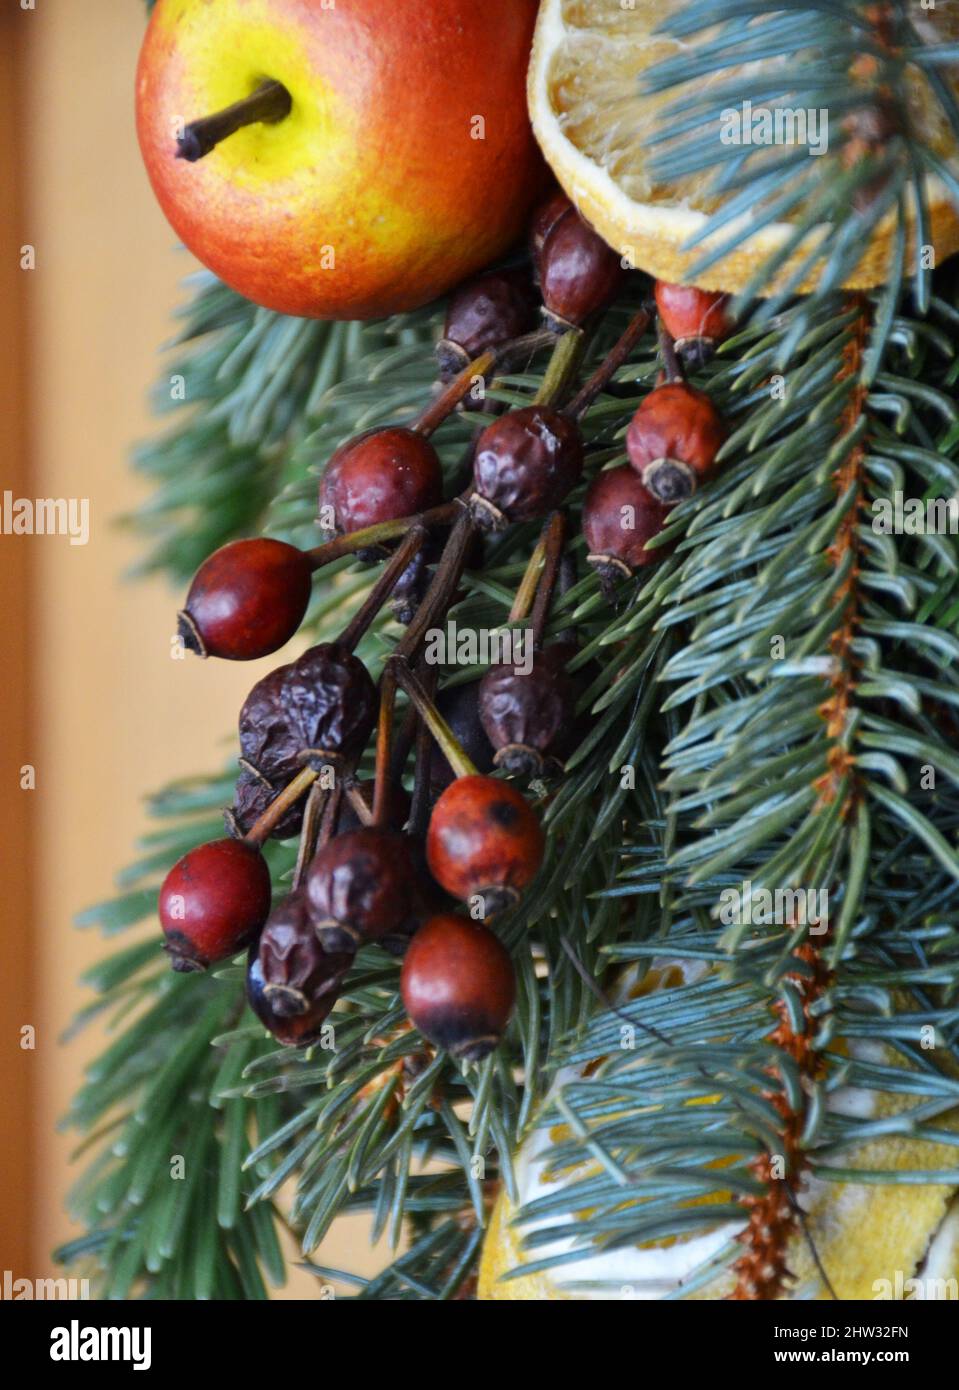 Christmas decorations on a wooden door Stock Photo